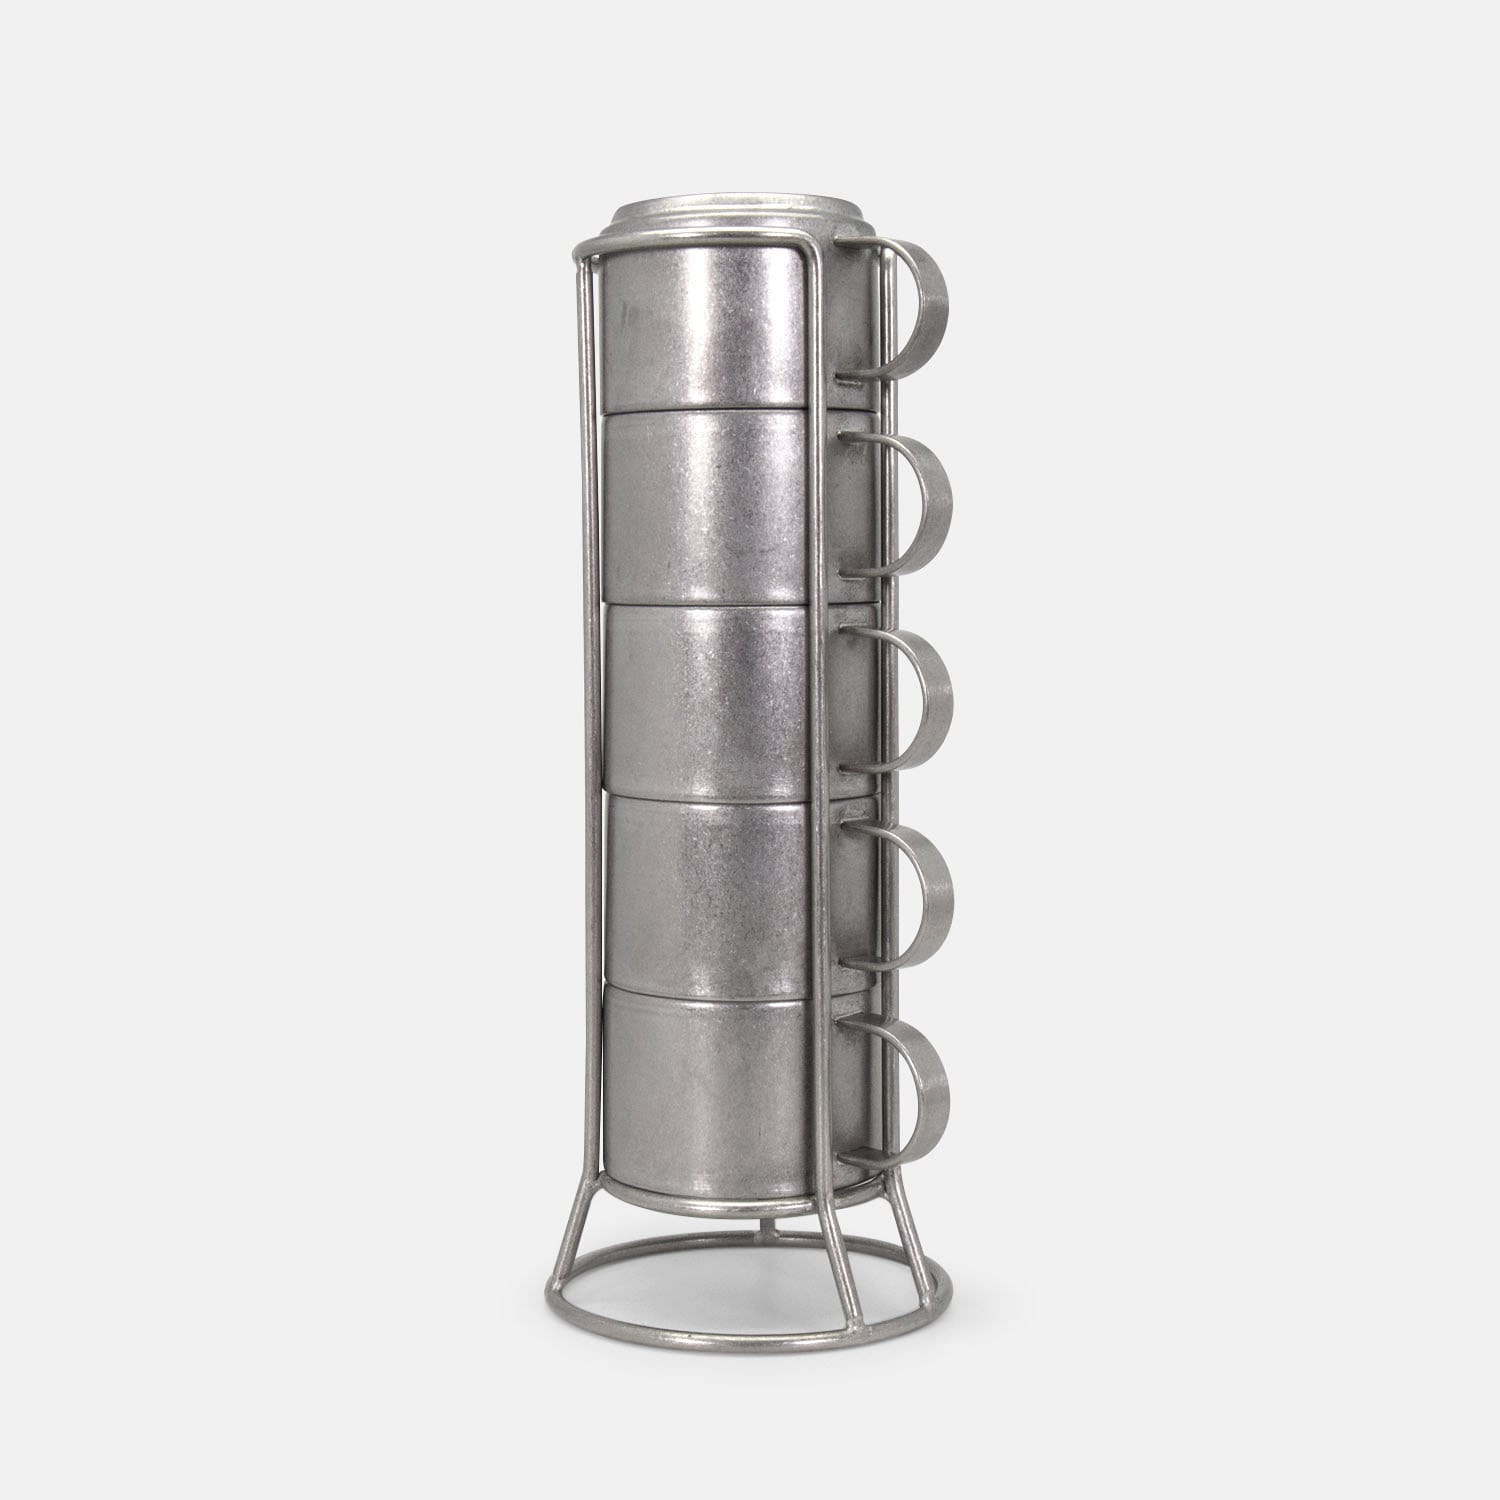 Matte Stainless Steel Double-Wall Mug Set of 5 with Holder Stand